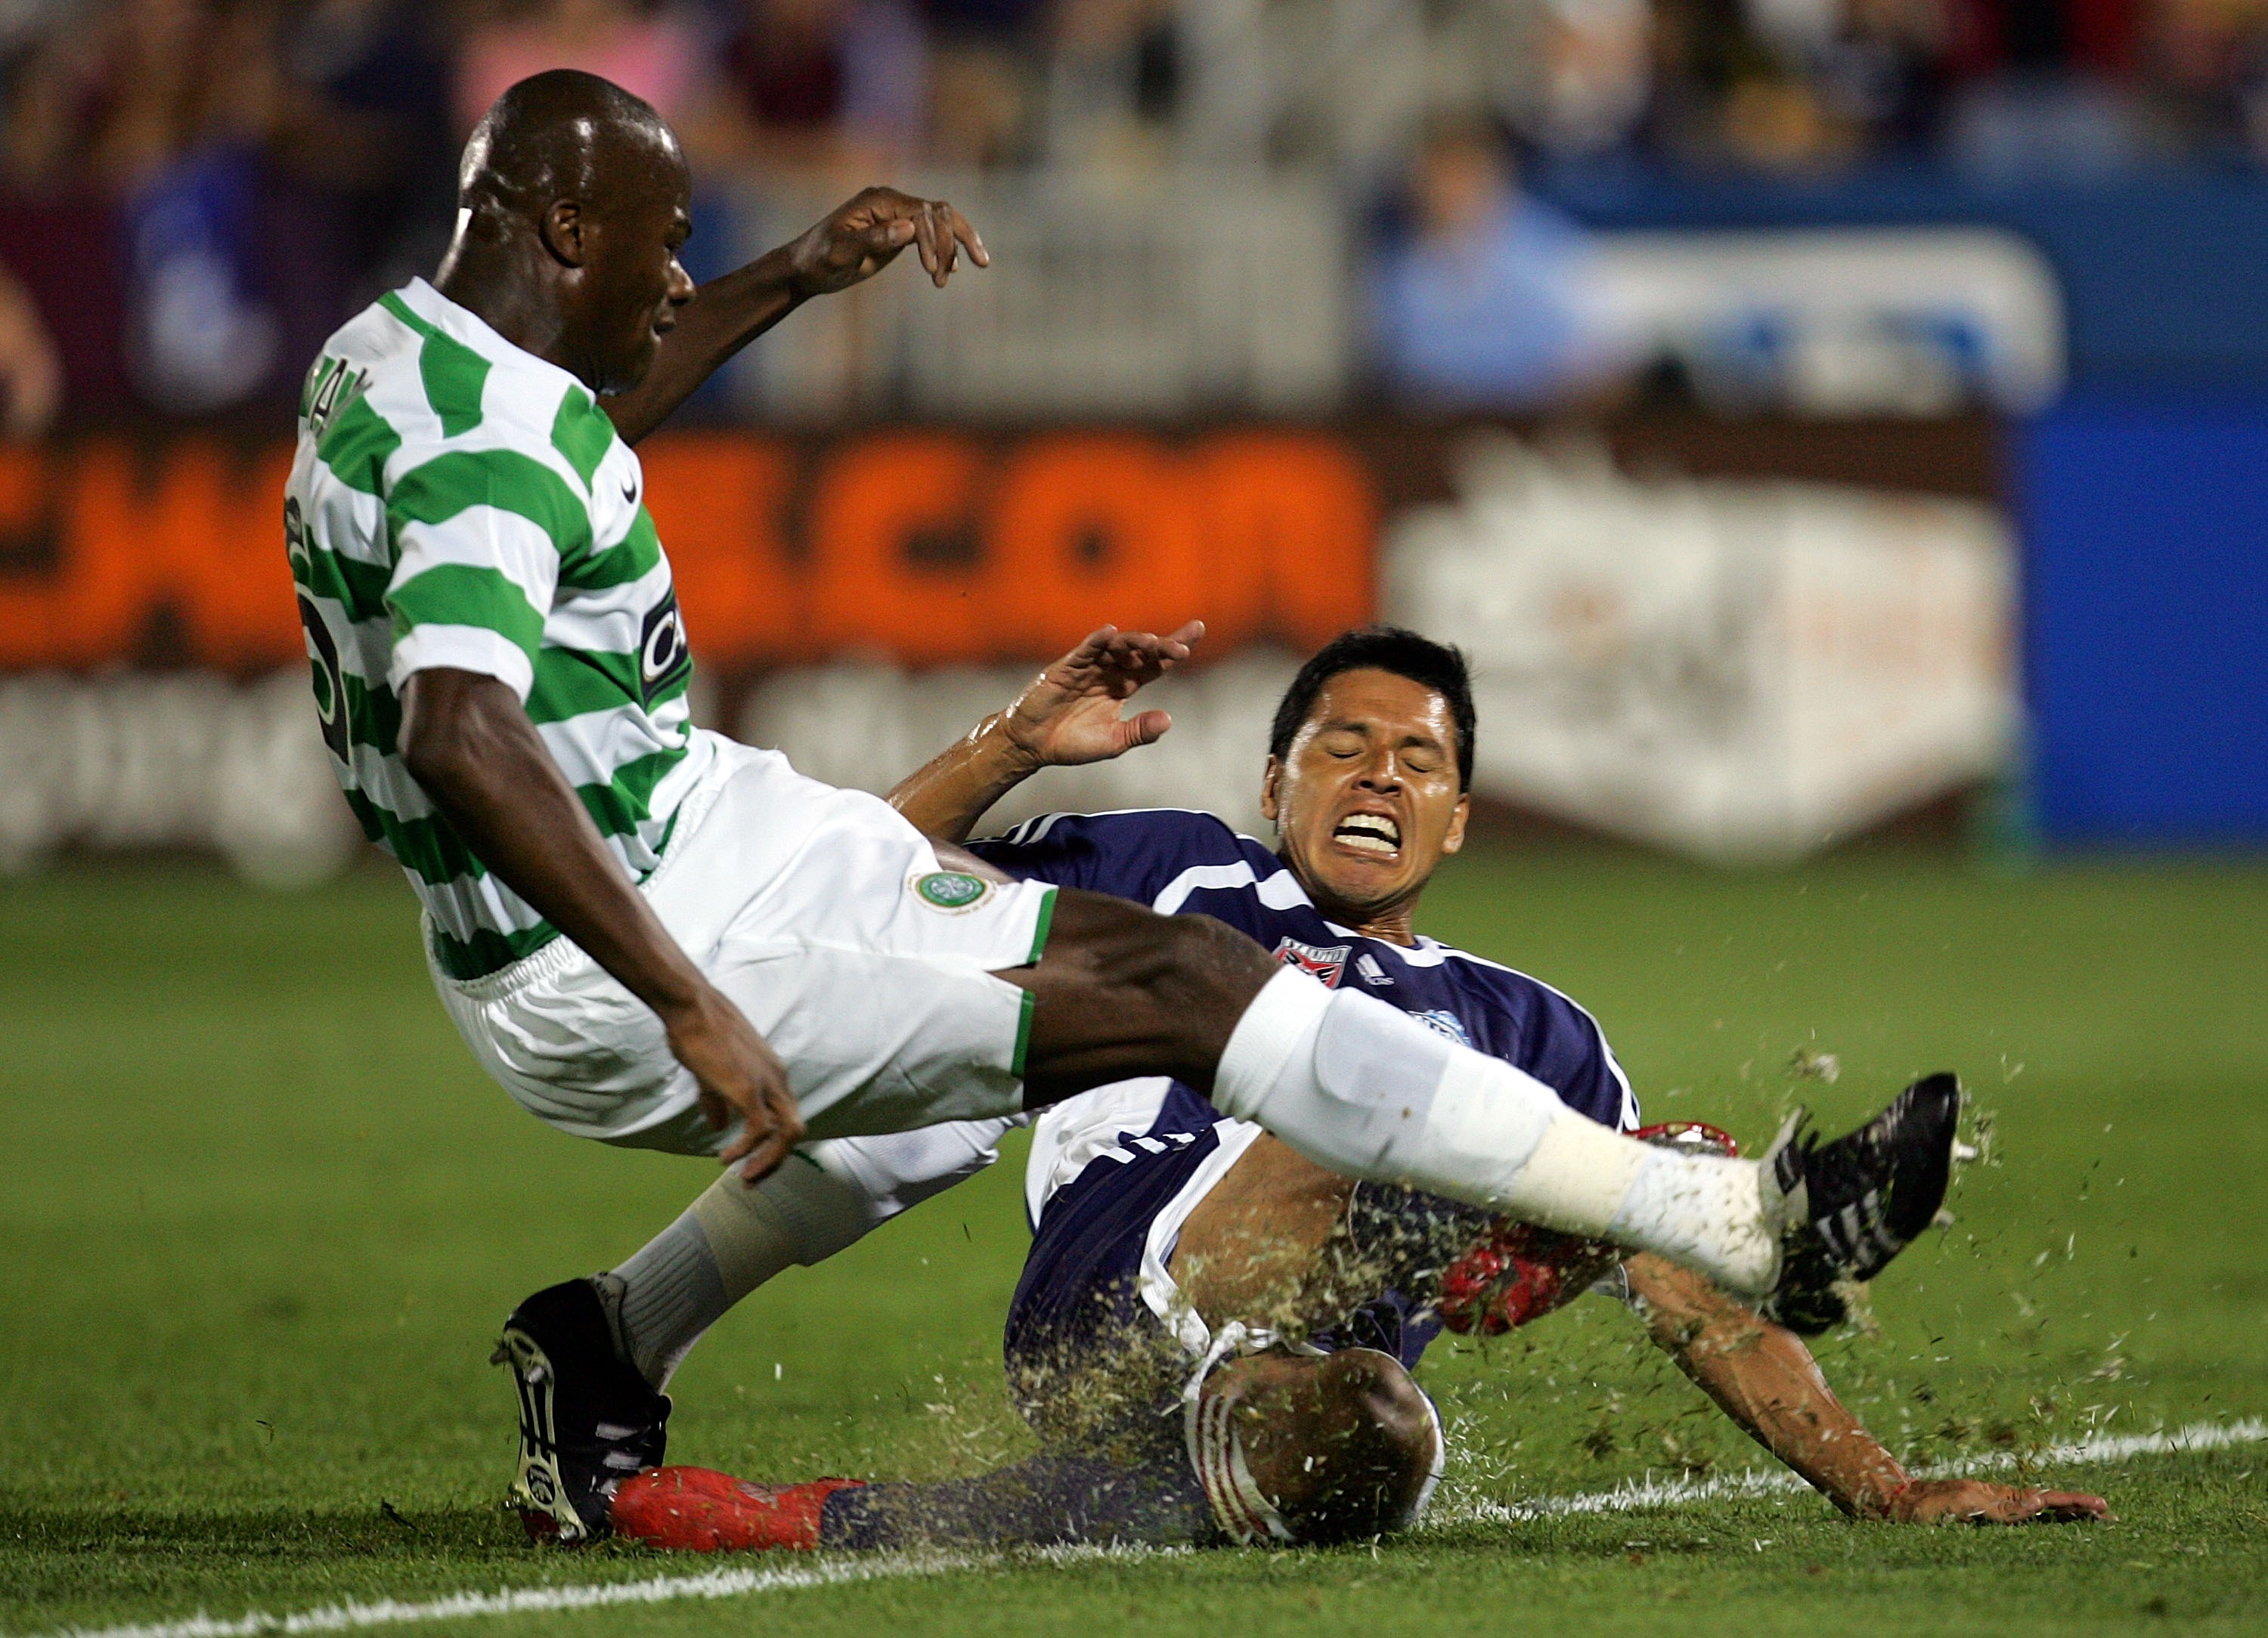 Craig Moore ran away from Bobo Balde after a Celtic derby match at Ibrox